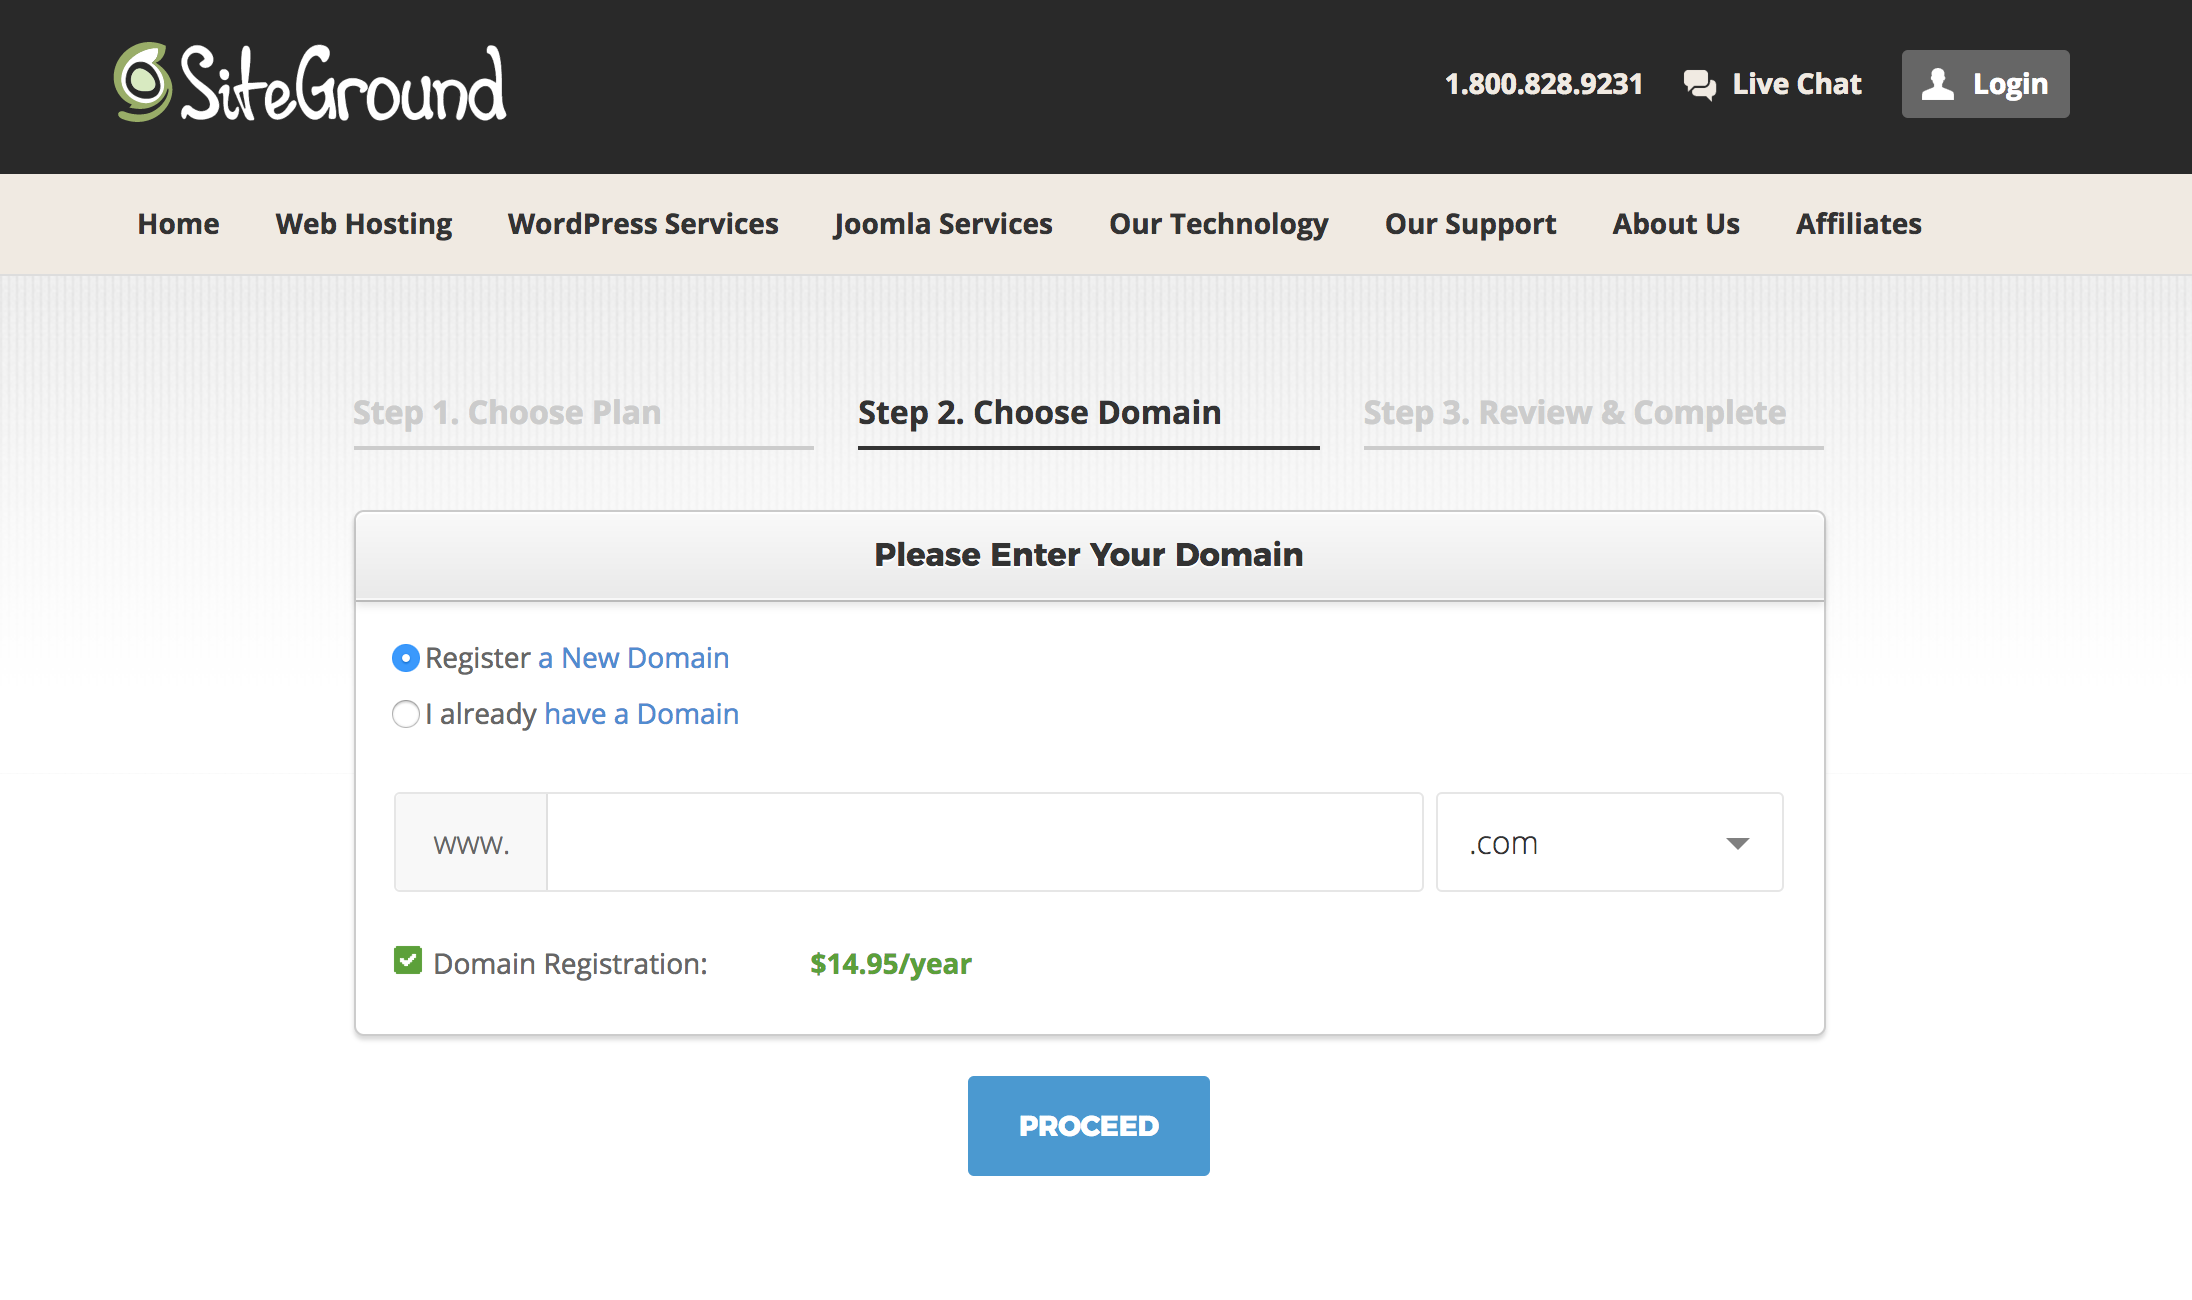 Learn how to make a wordpress blog with Siteground, Check your domain with the Siteground registration